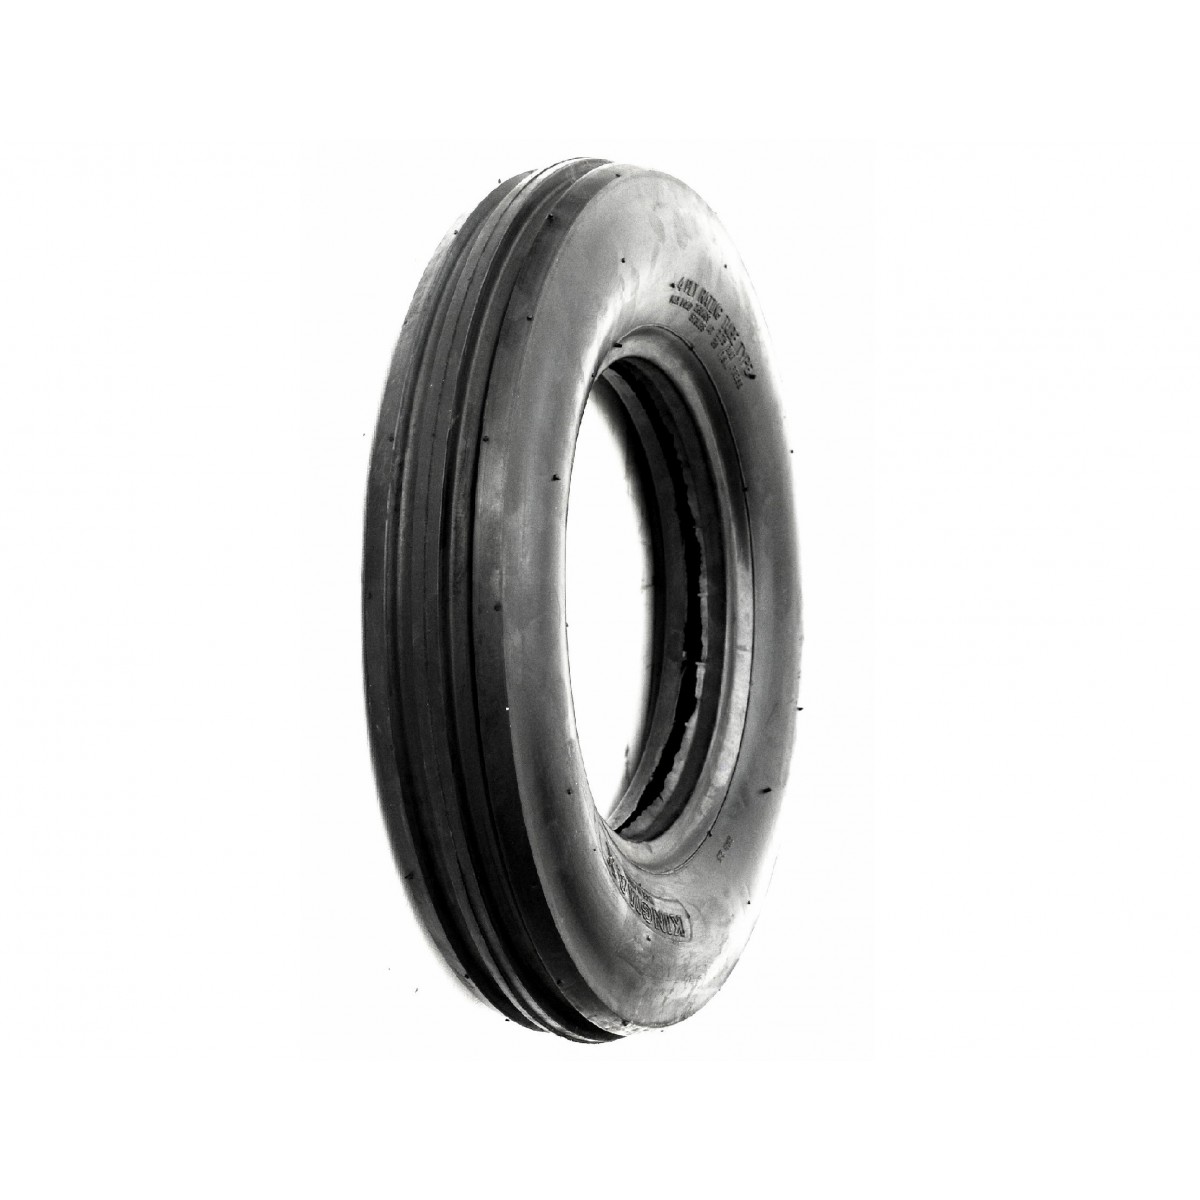 Agricultural tire 4.50-10 6PR 4.5-10 4.5x10 SMOOTH